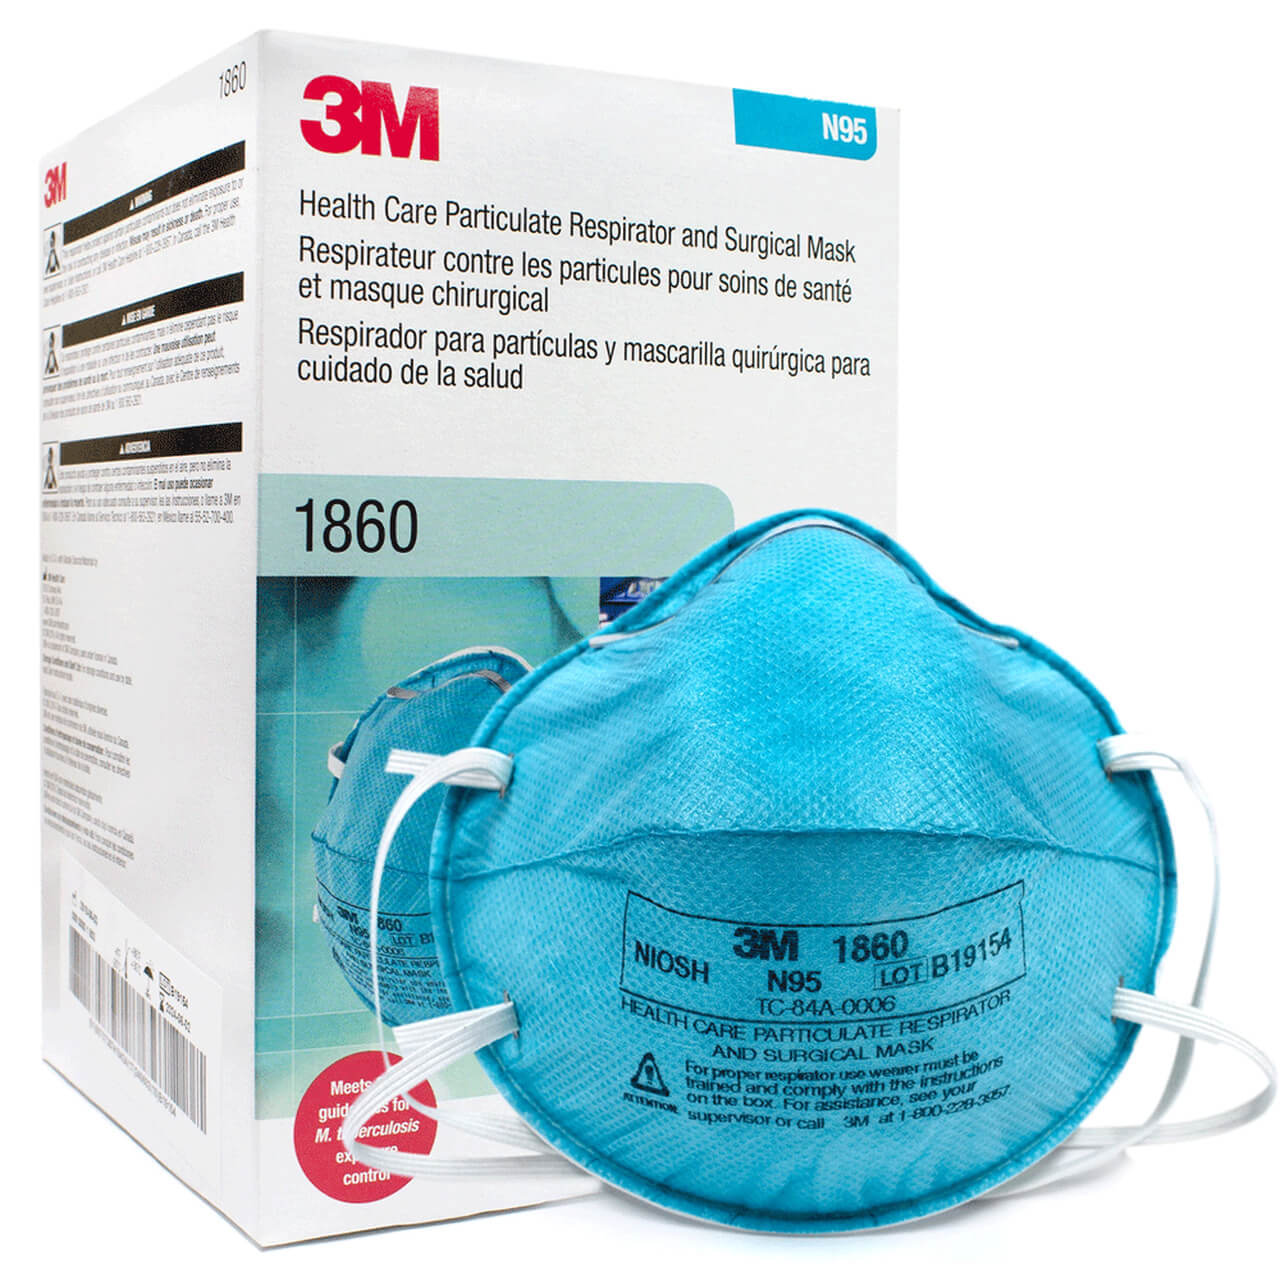 How to Tell if Your 3M N95 Respirator Has Been Approved by NIOSH